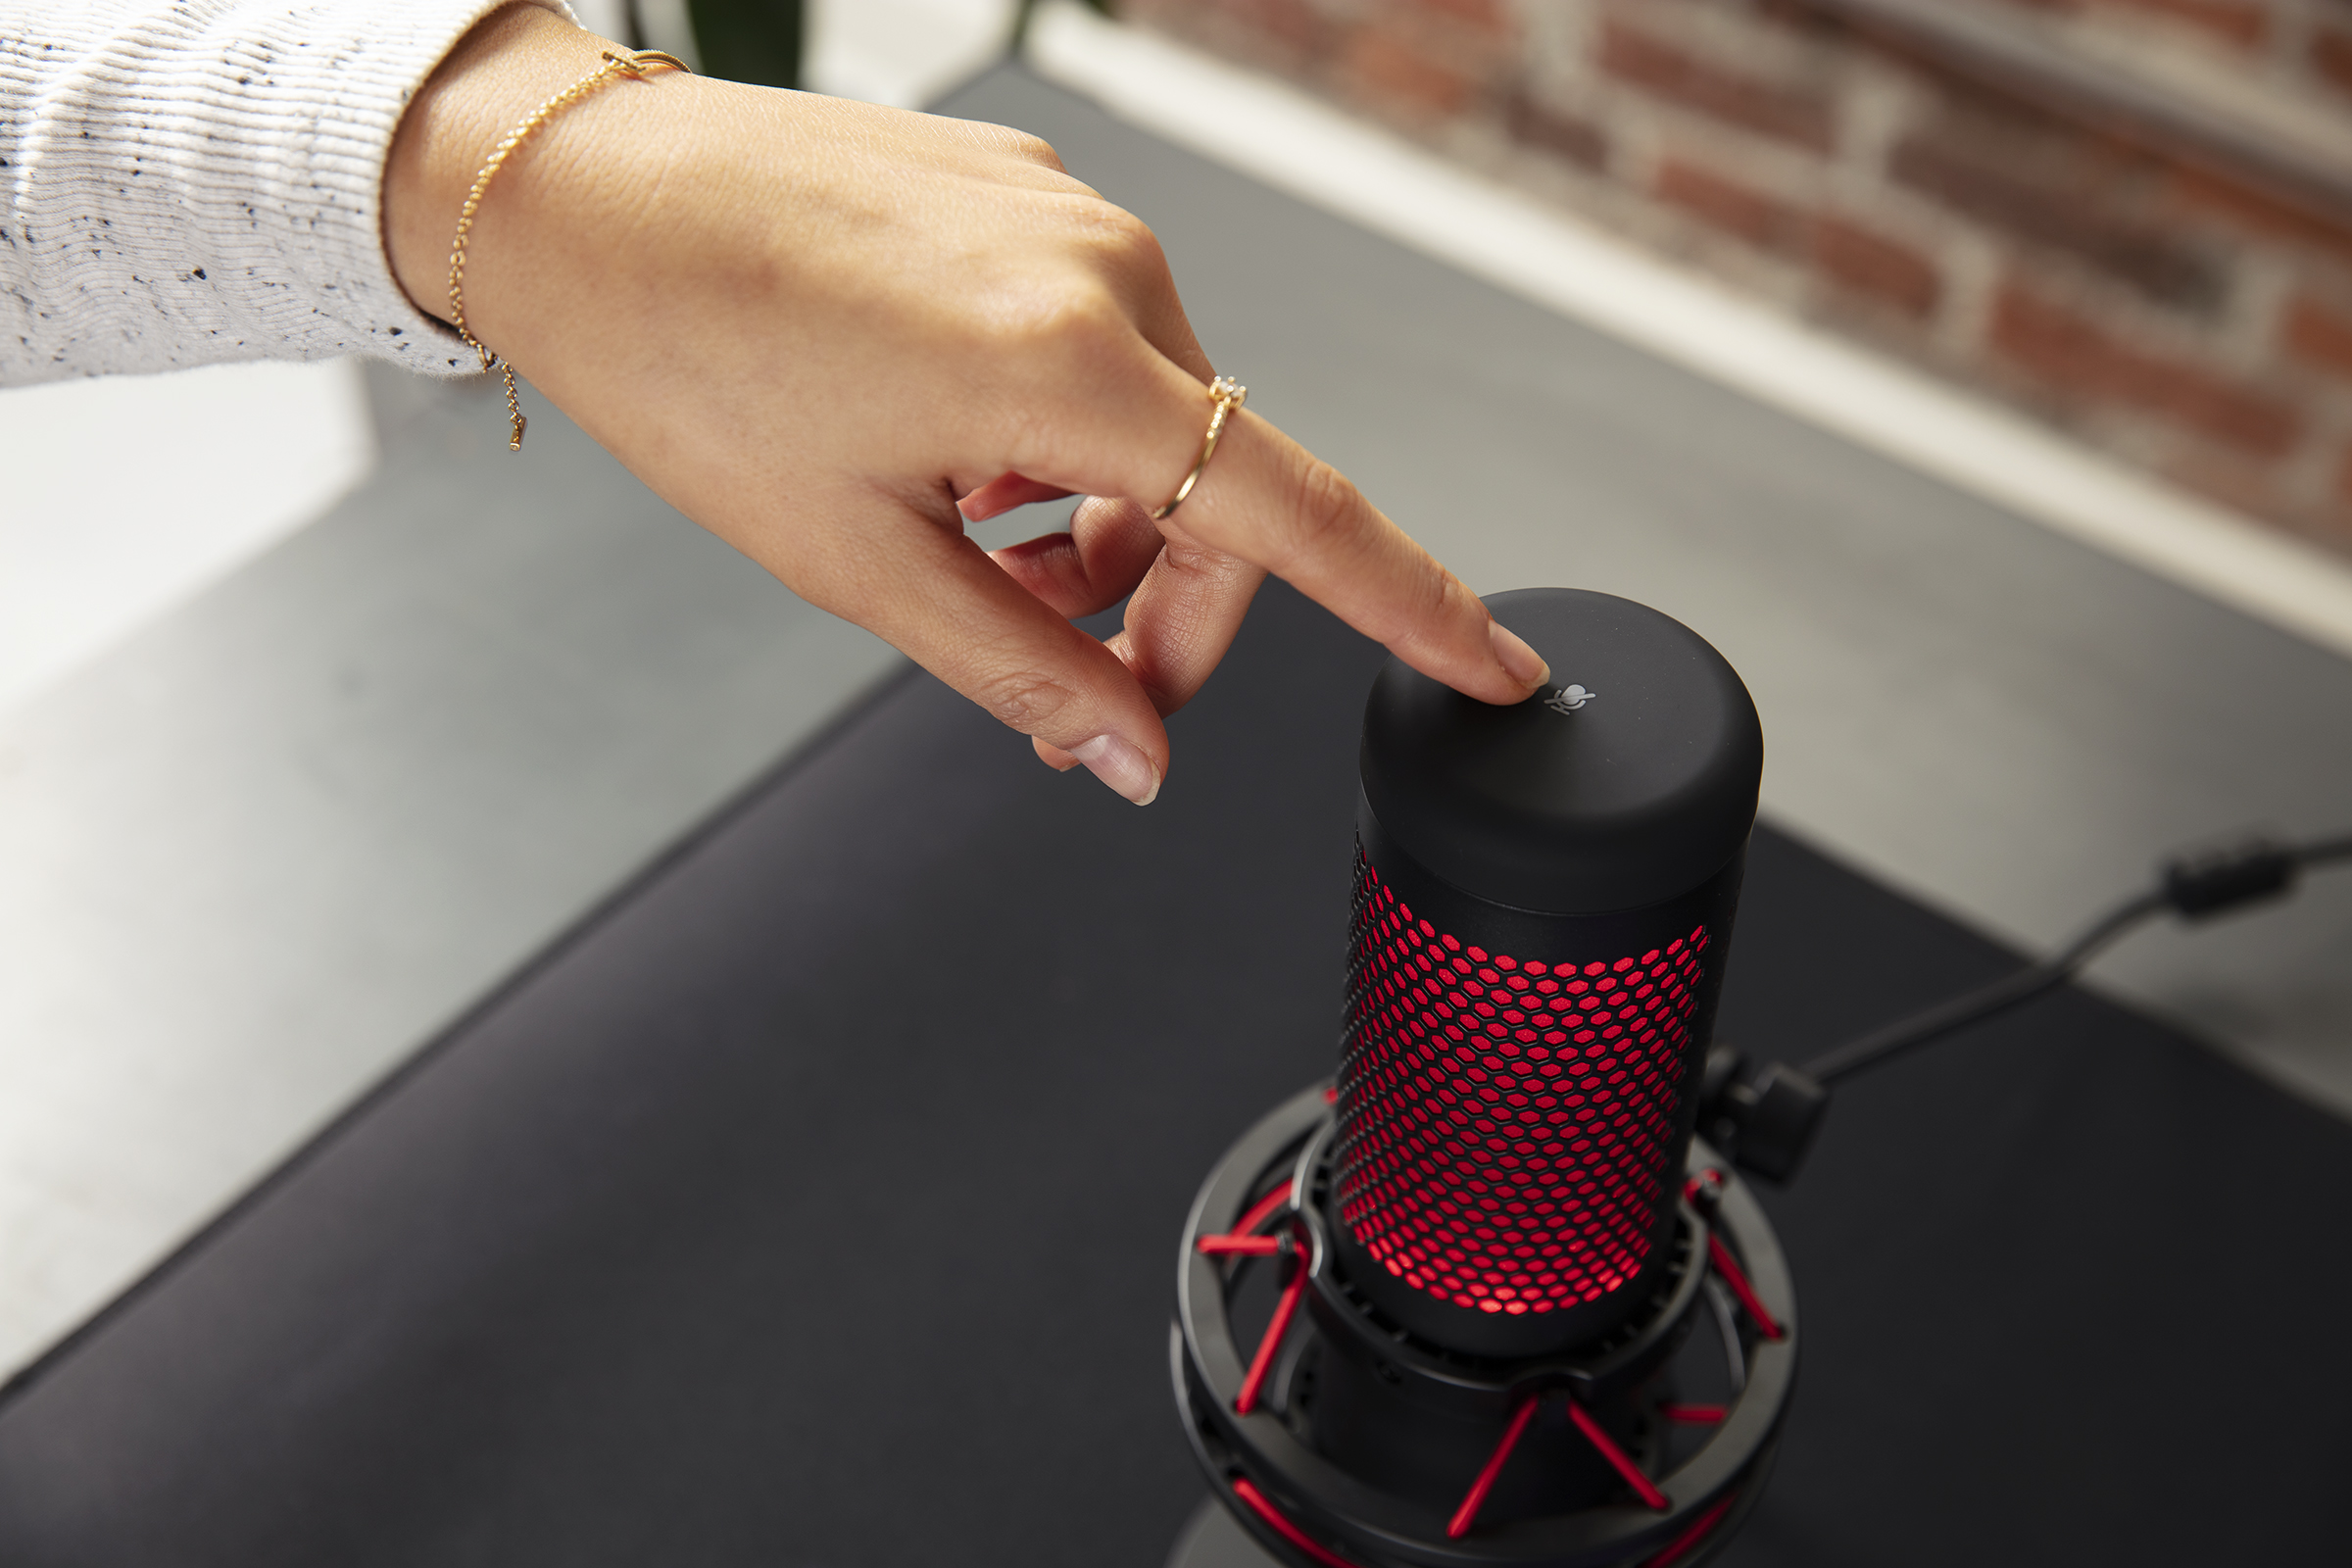 HyperX Launches Quadcast Microphone In India For Streamers And Casters